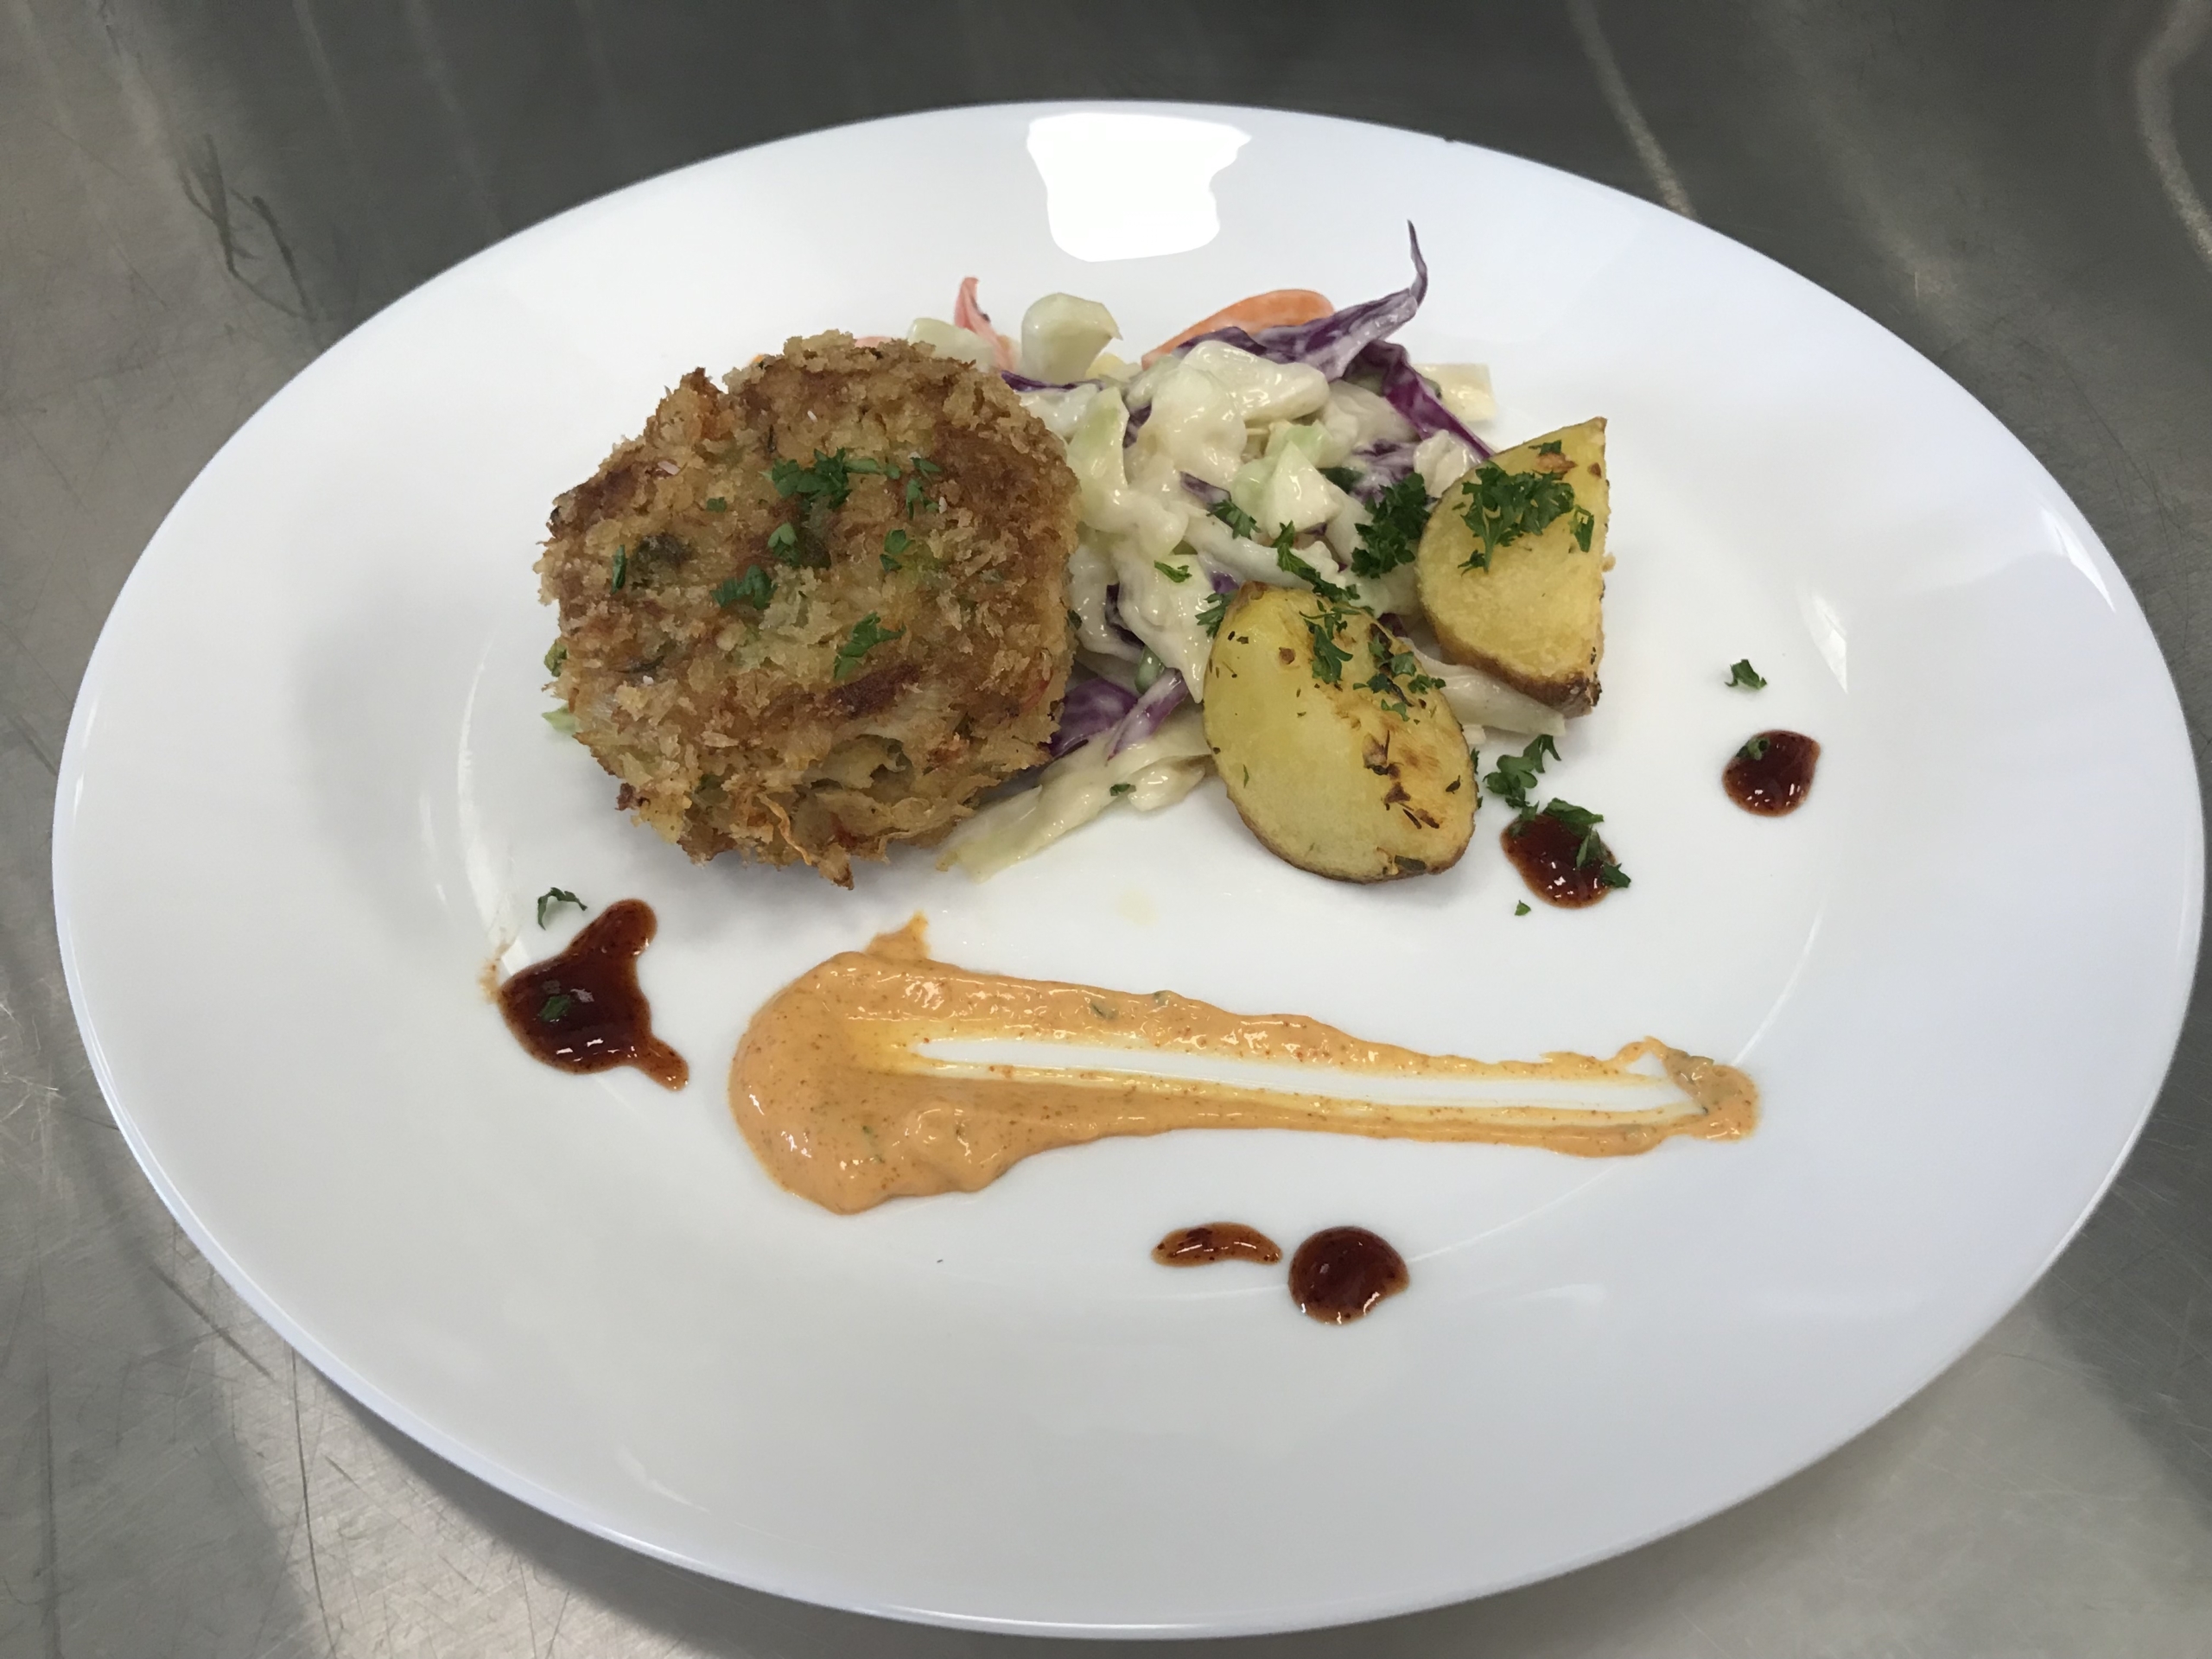 Crab Cake and Remoulade Sauce